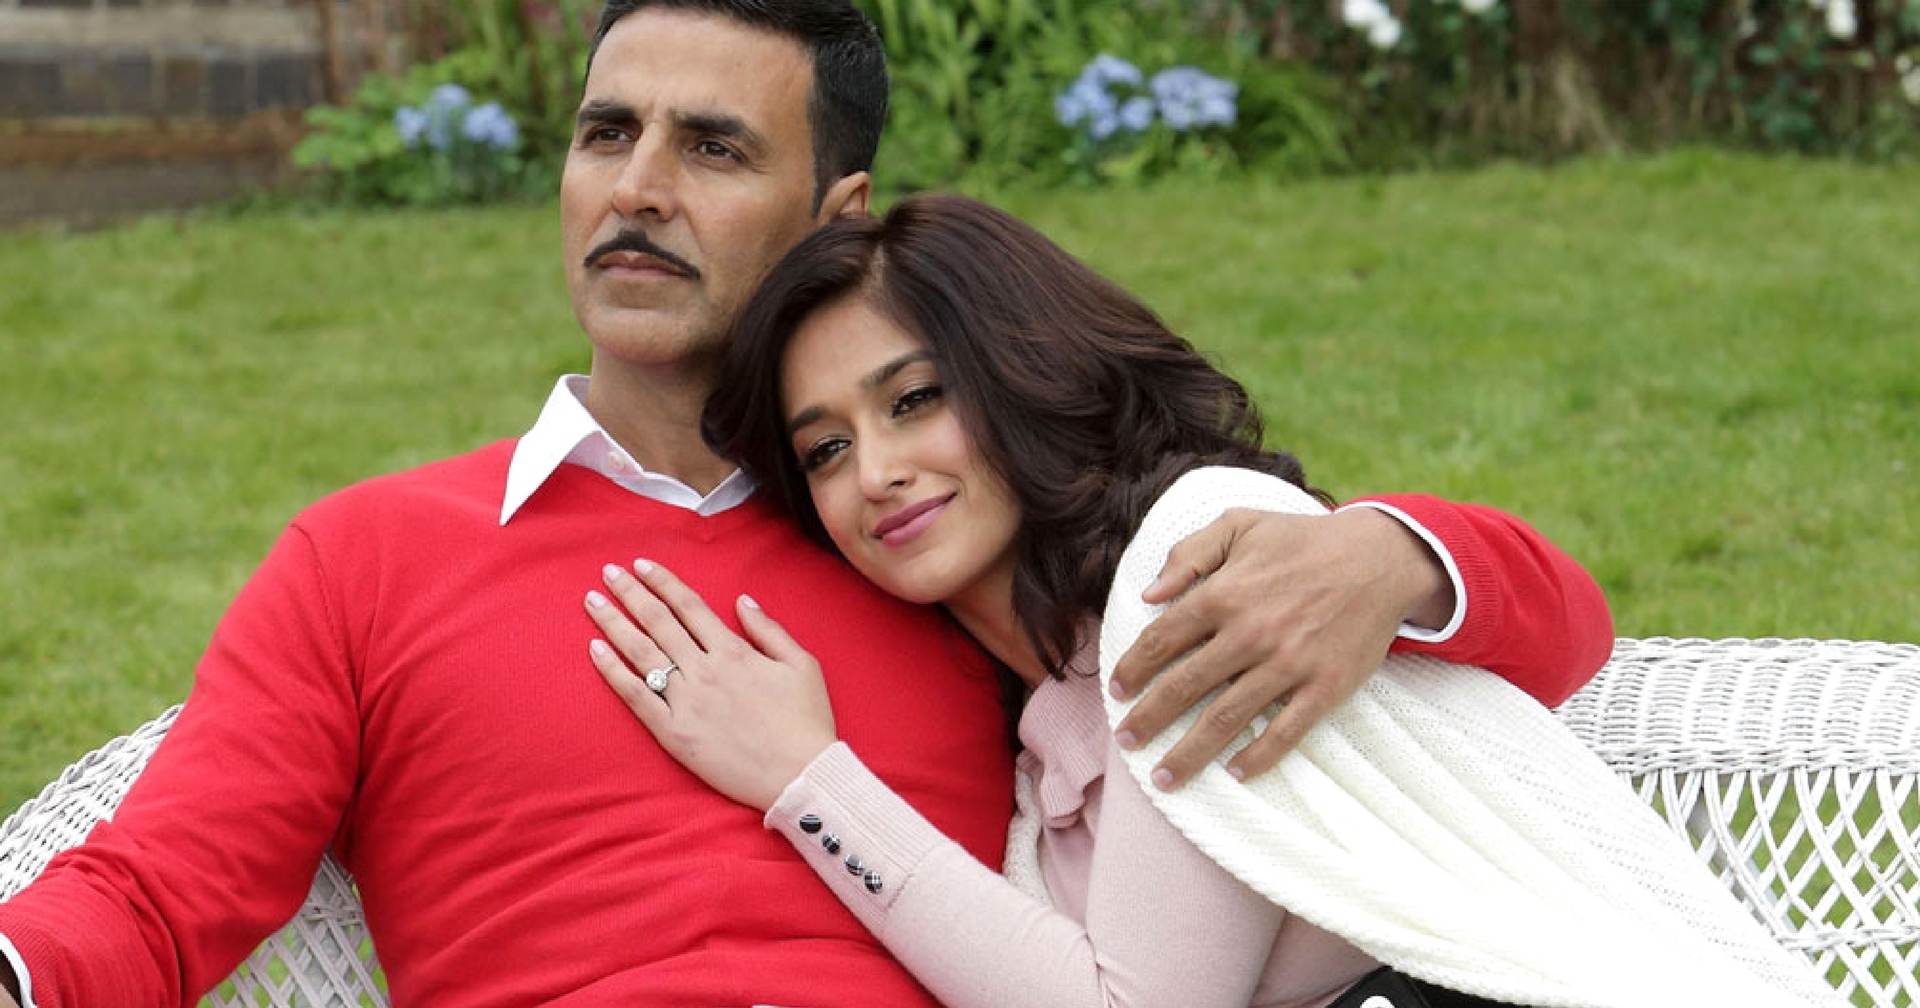 Rustom Review The Plot Is About A Crime Of Passion But Strangely, The ...